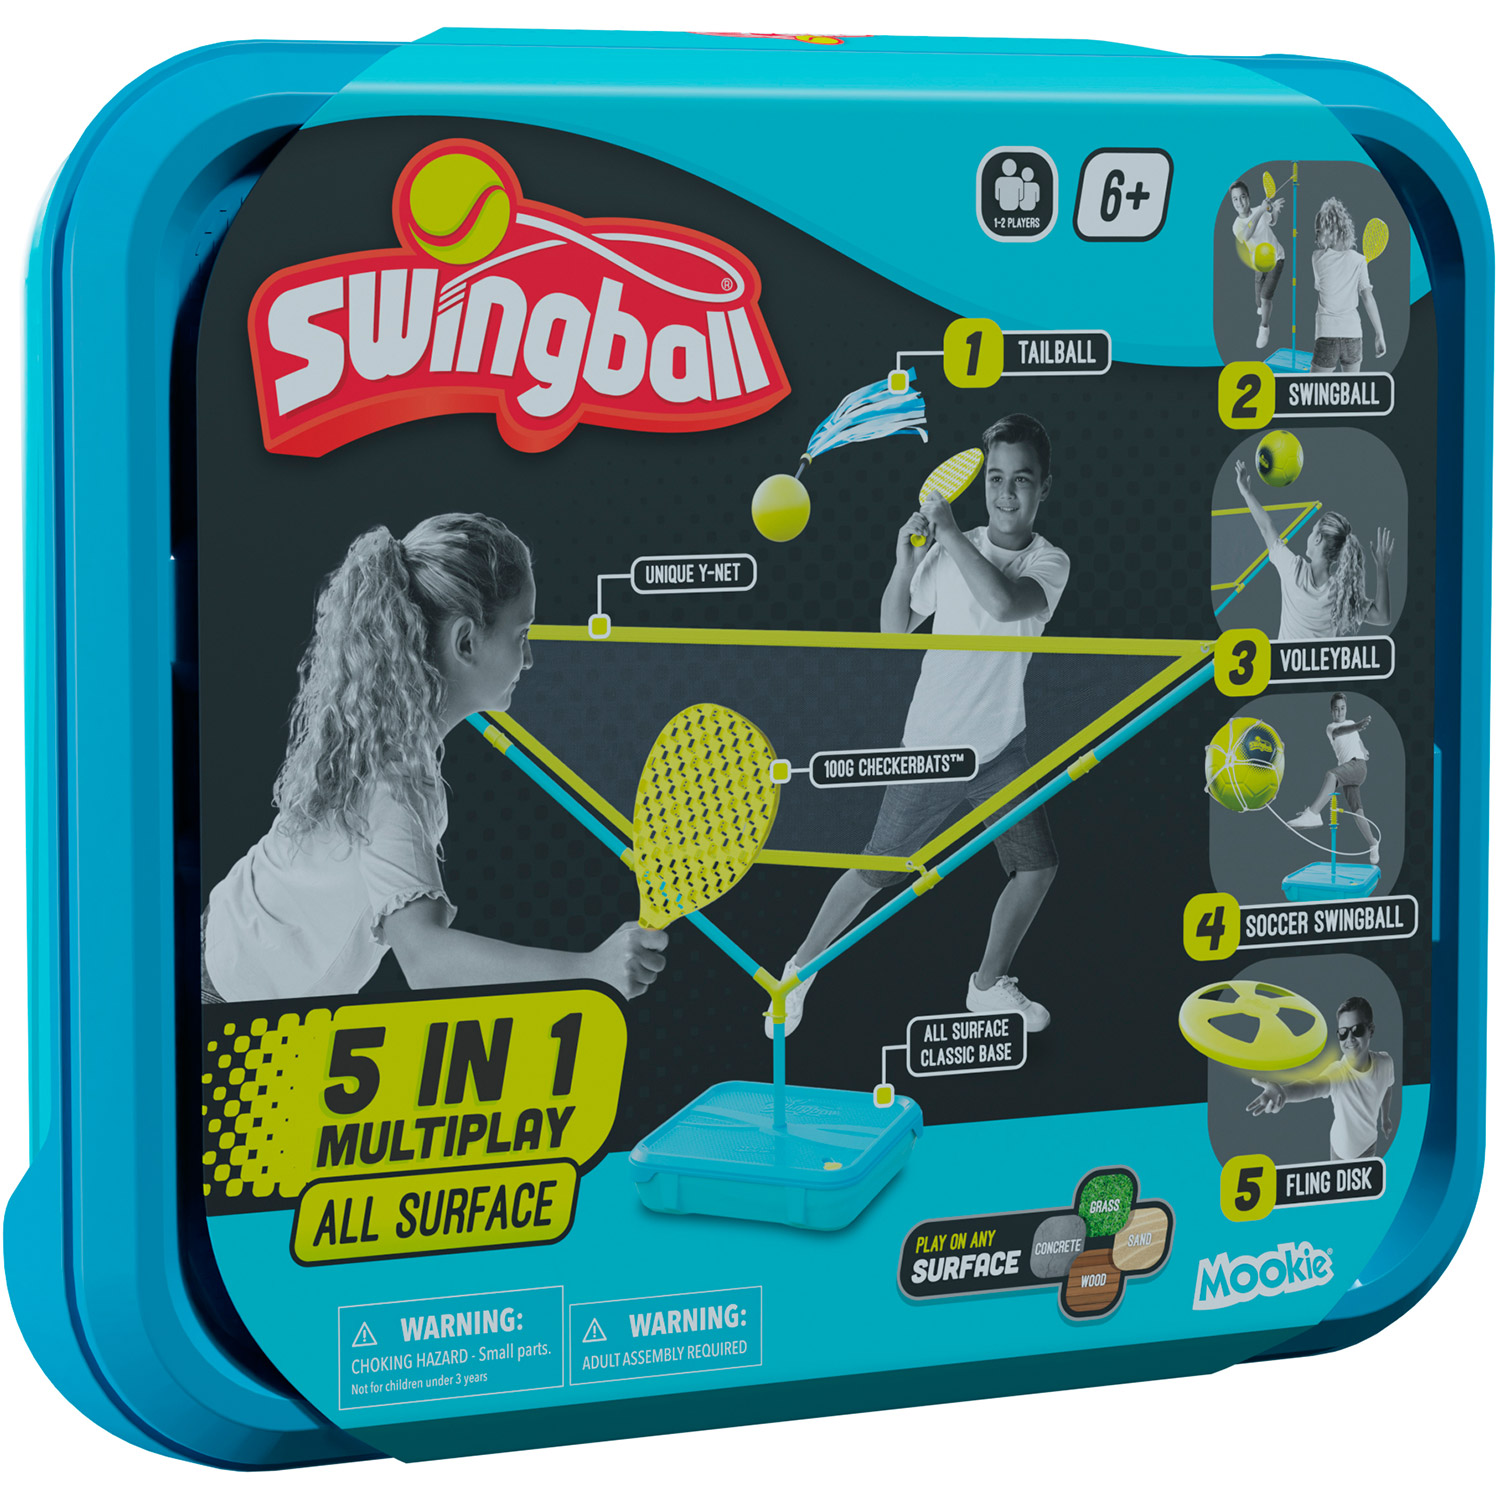 Swingball 5 in 1 multiplay all surface set